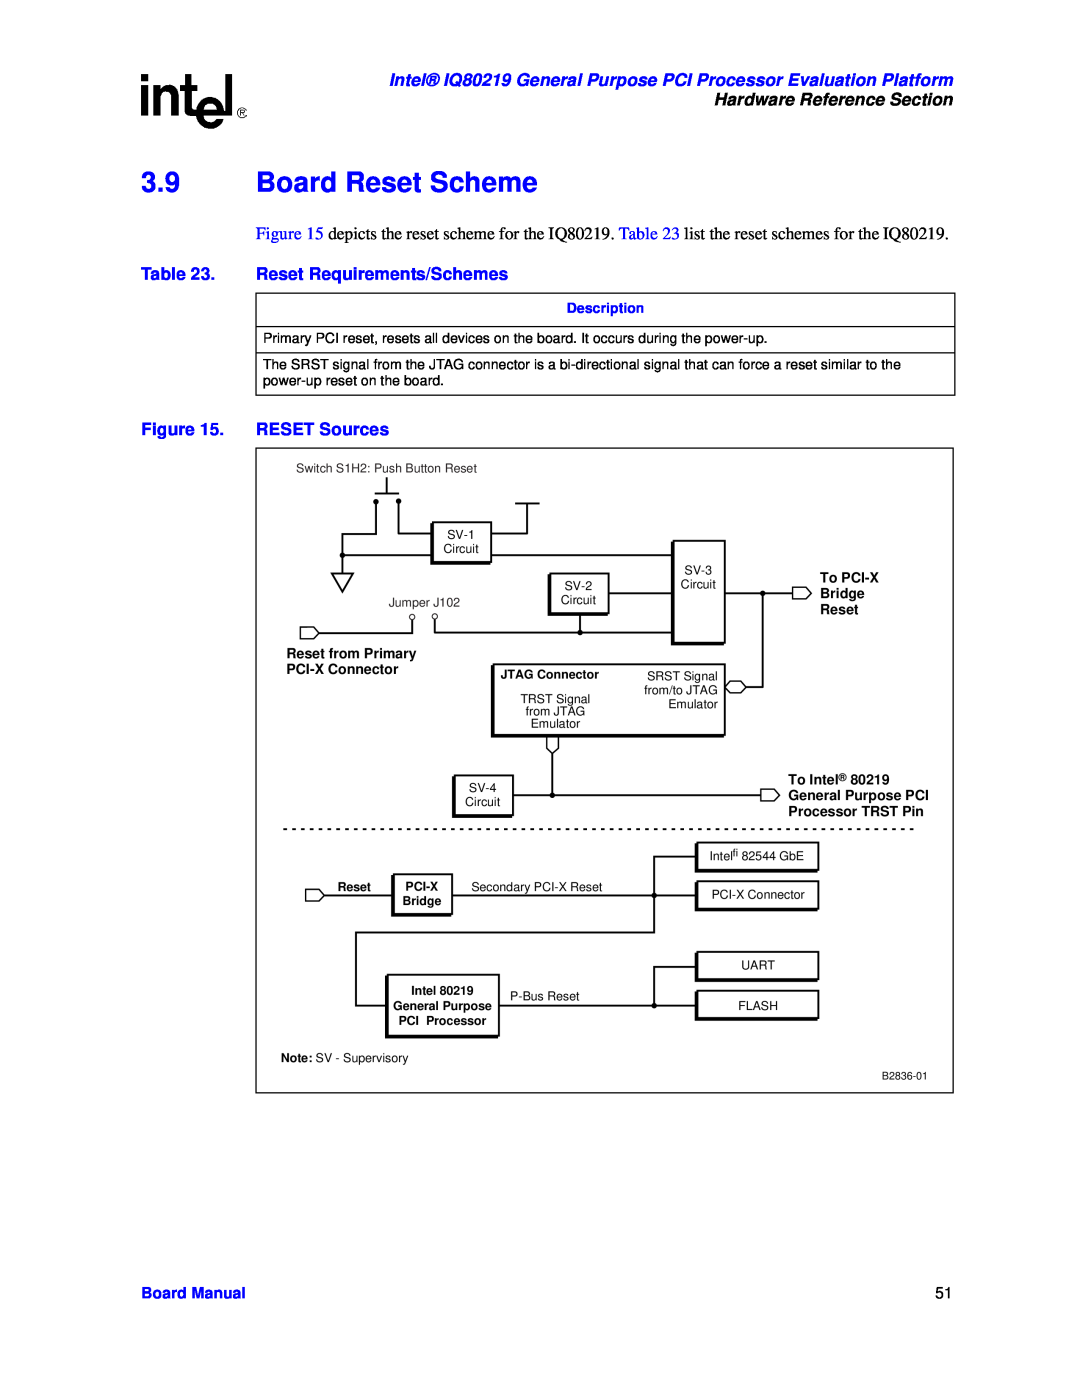 Intel IQ80219 Board Reset Scheme, Reset Requirements/Schemes, RESET Sources, Hardware Reference Section, Board Manual 